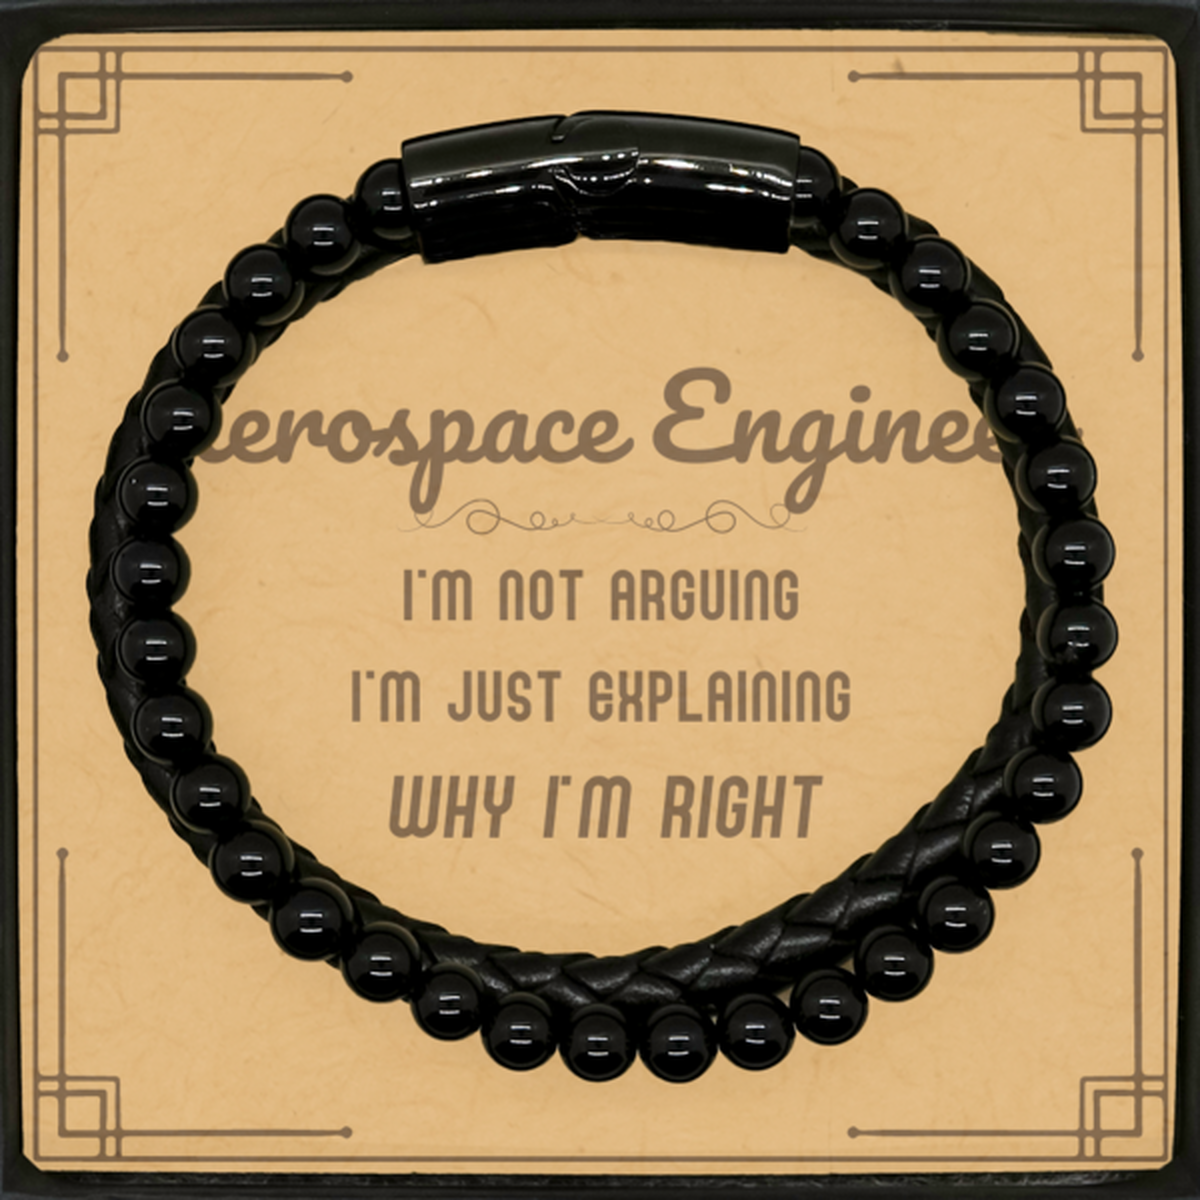 Aerospace Engineer I'm not Arguing. I'm Just Explaining Why I'm RIGHT Stone Leather Bracelets, Funny Saying Quote Aerospace Engineer Gifts For Aerospace Engineer Message Card Graduation Birthday Christmas Gifts for Men Women Coworker